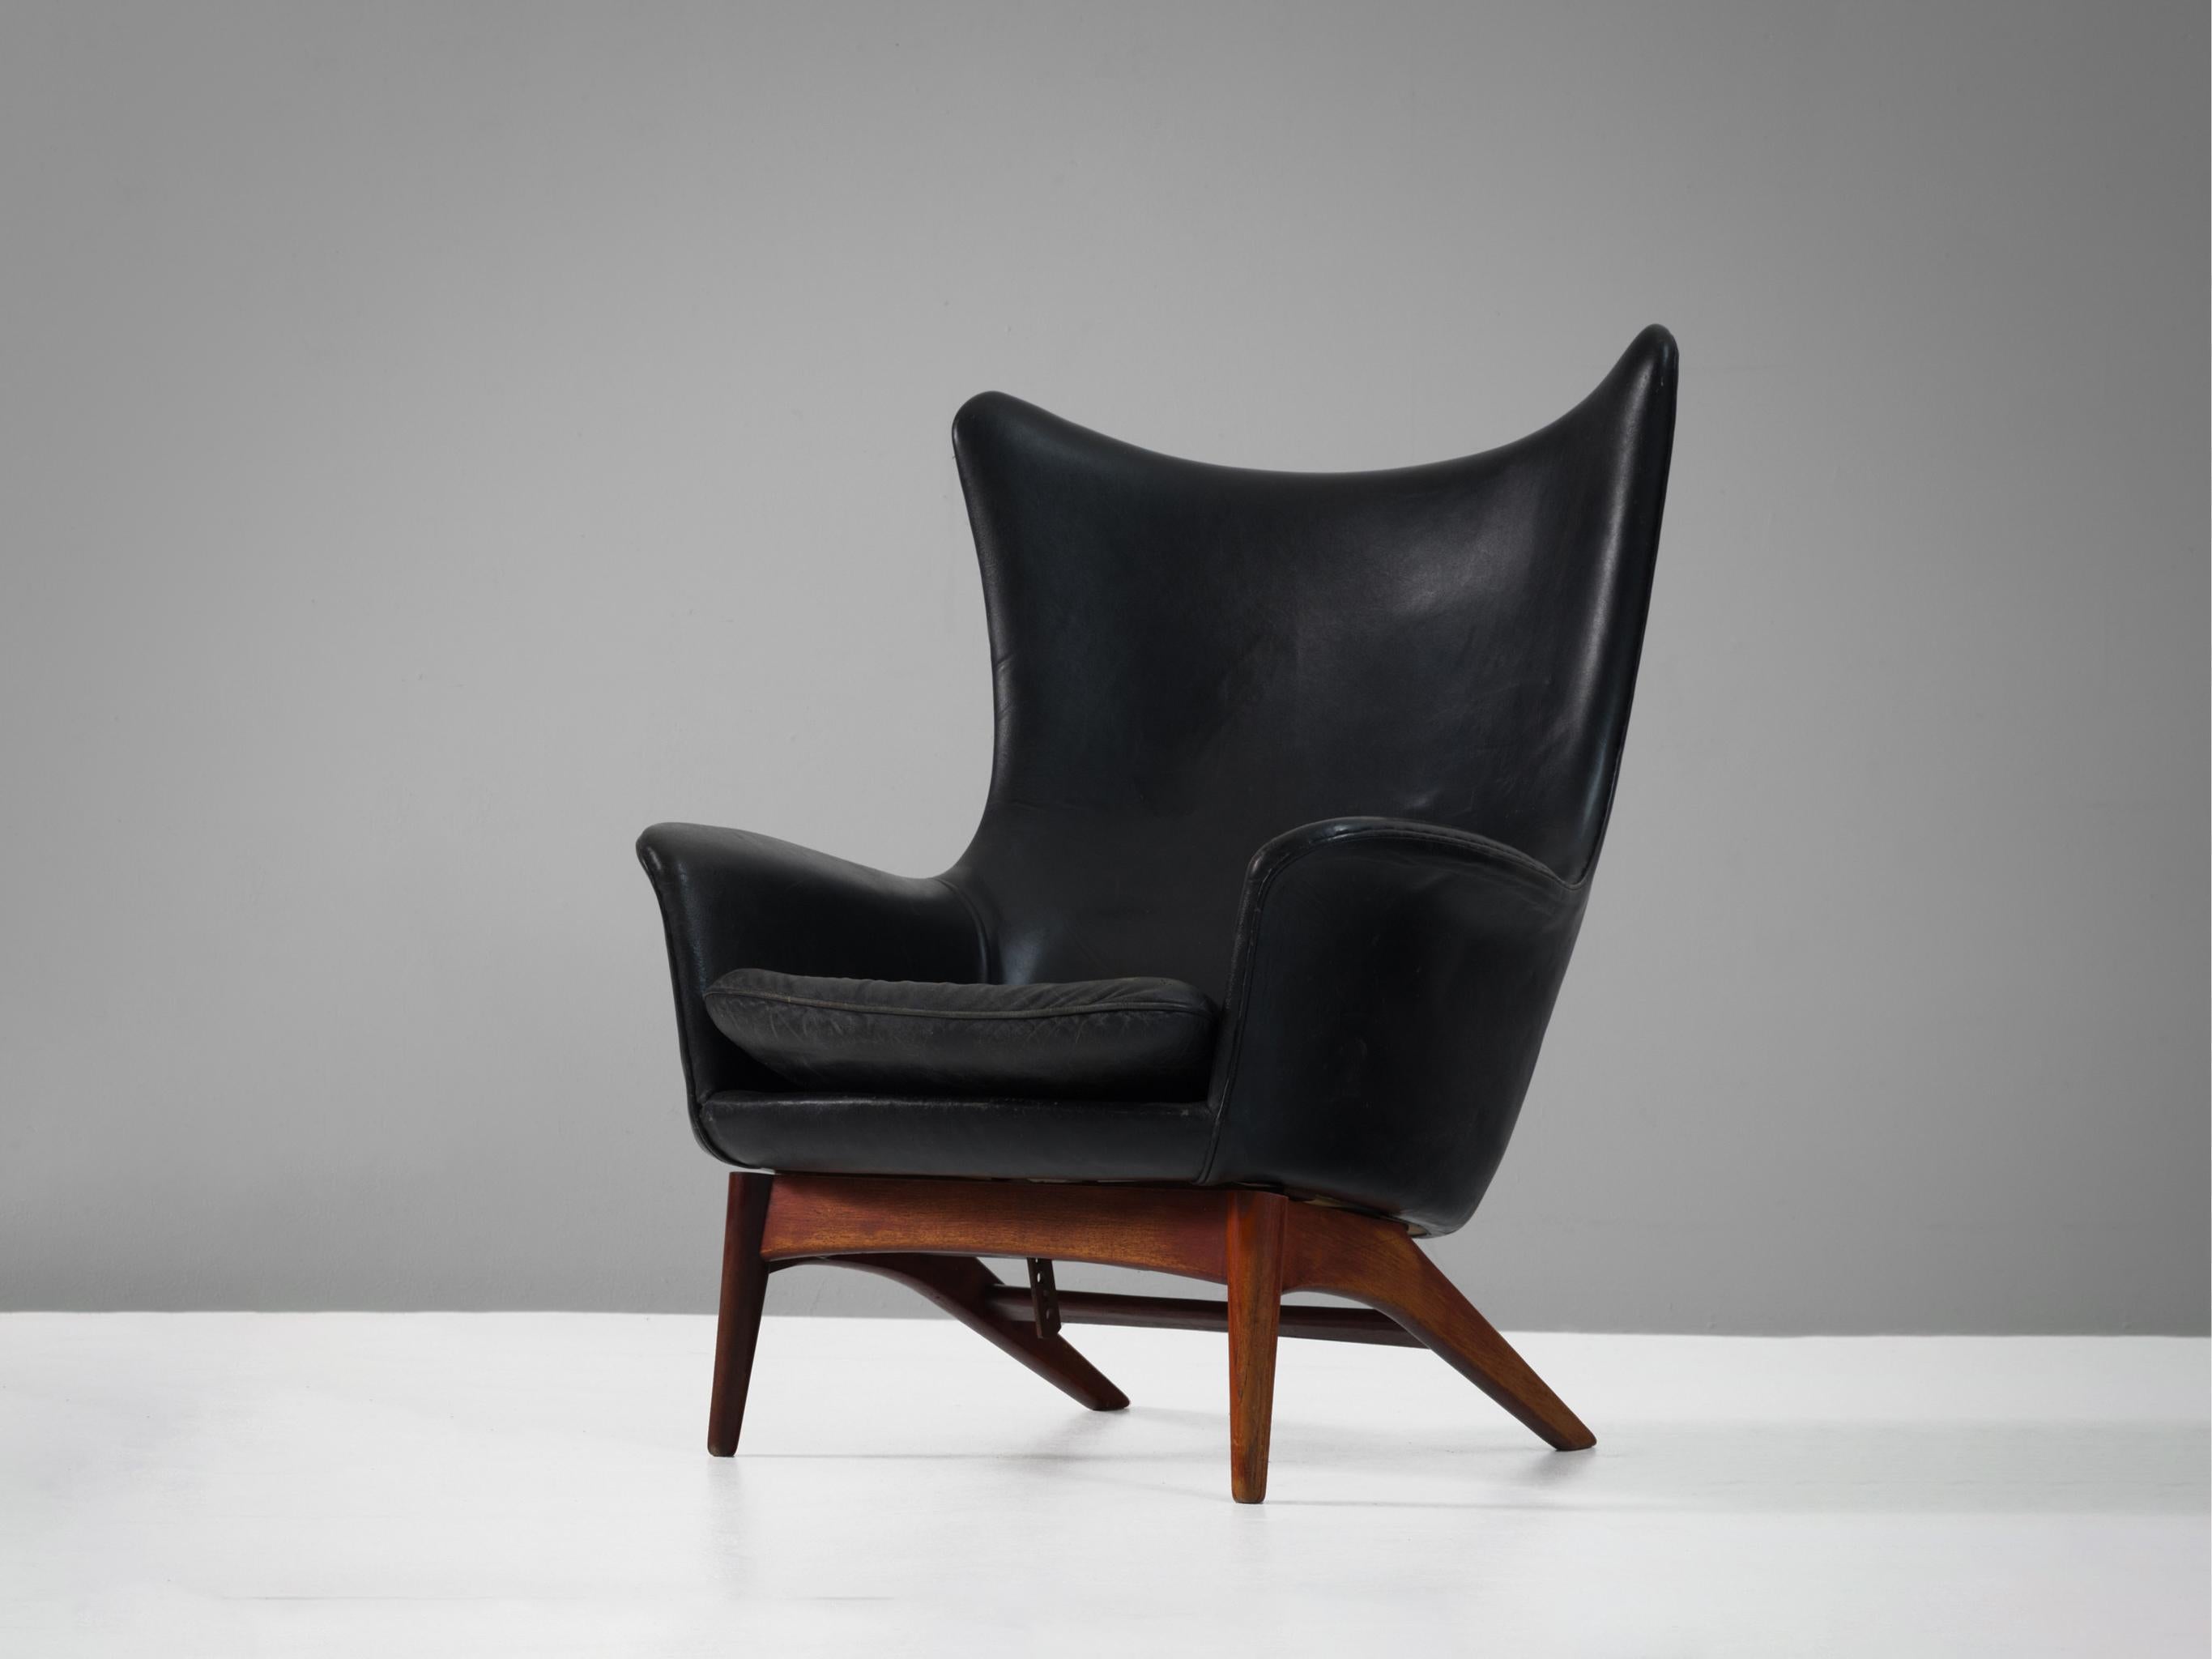 H.W. Klein for Bramin wingback chair, teak, leather, Denmark, 1950s. 

Sculptural lounge chair by Henry Walter Klein. This wingback chair is a great example of Scandinavian design and comfort. Beautiful organic formed seating, with solid wooden